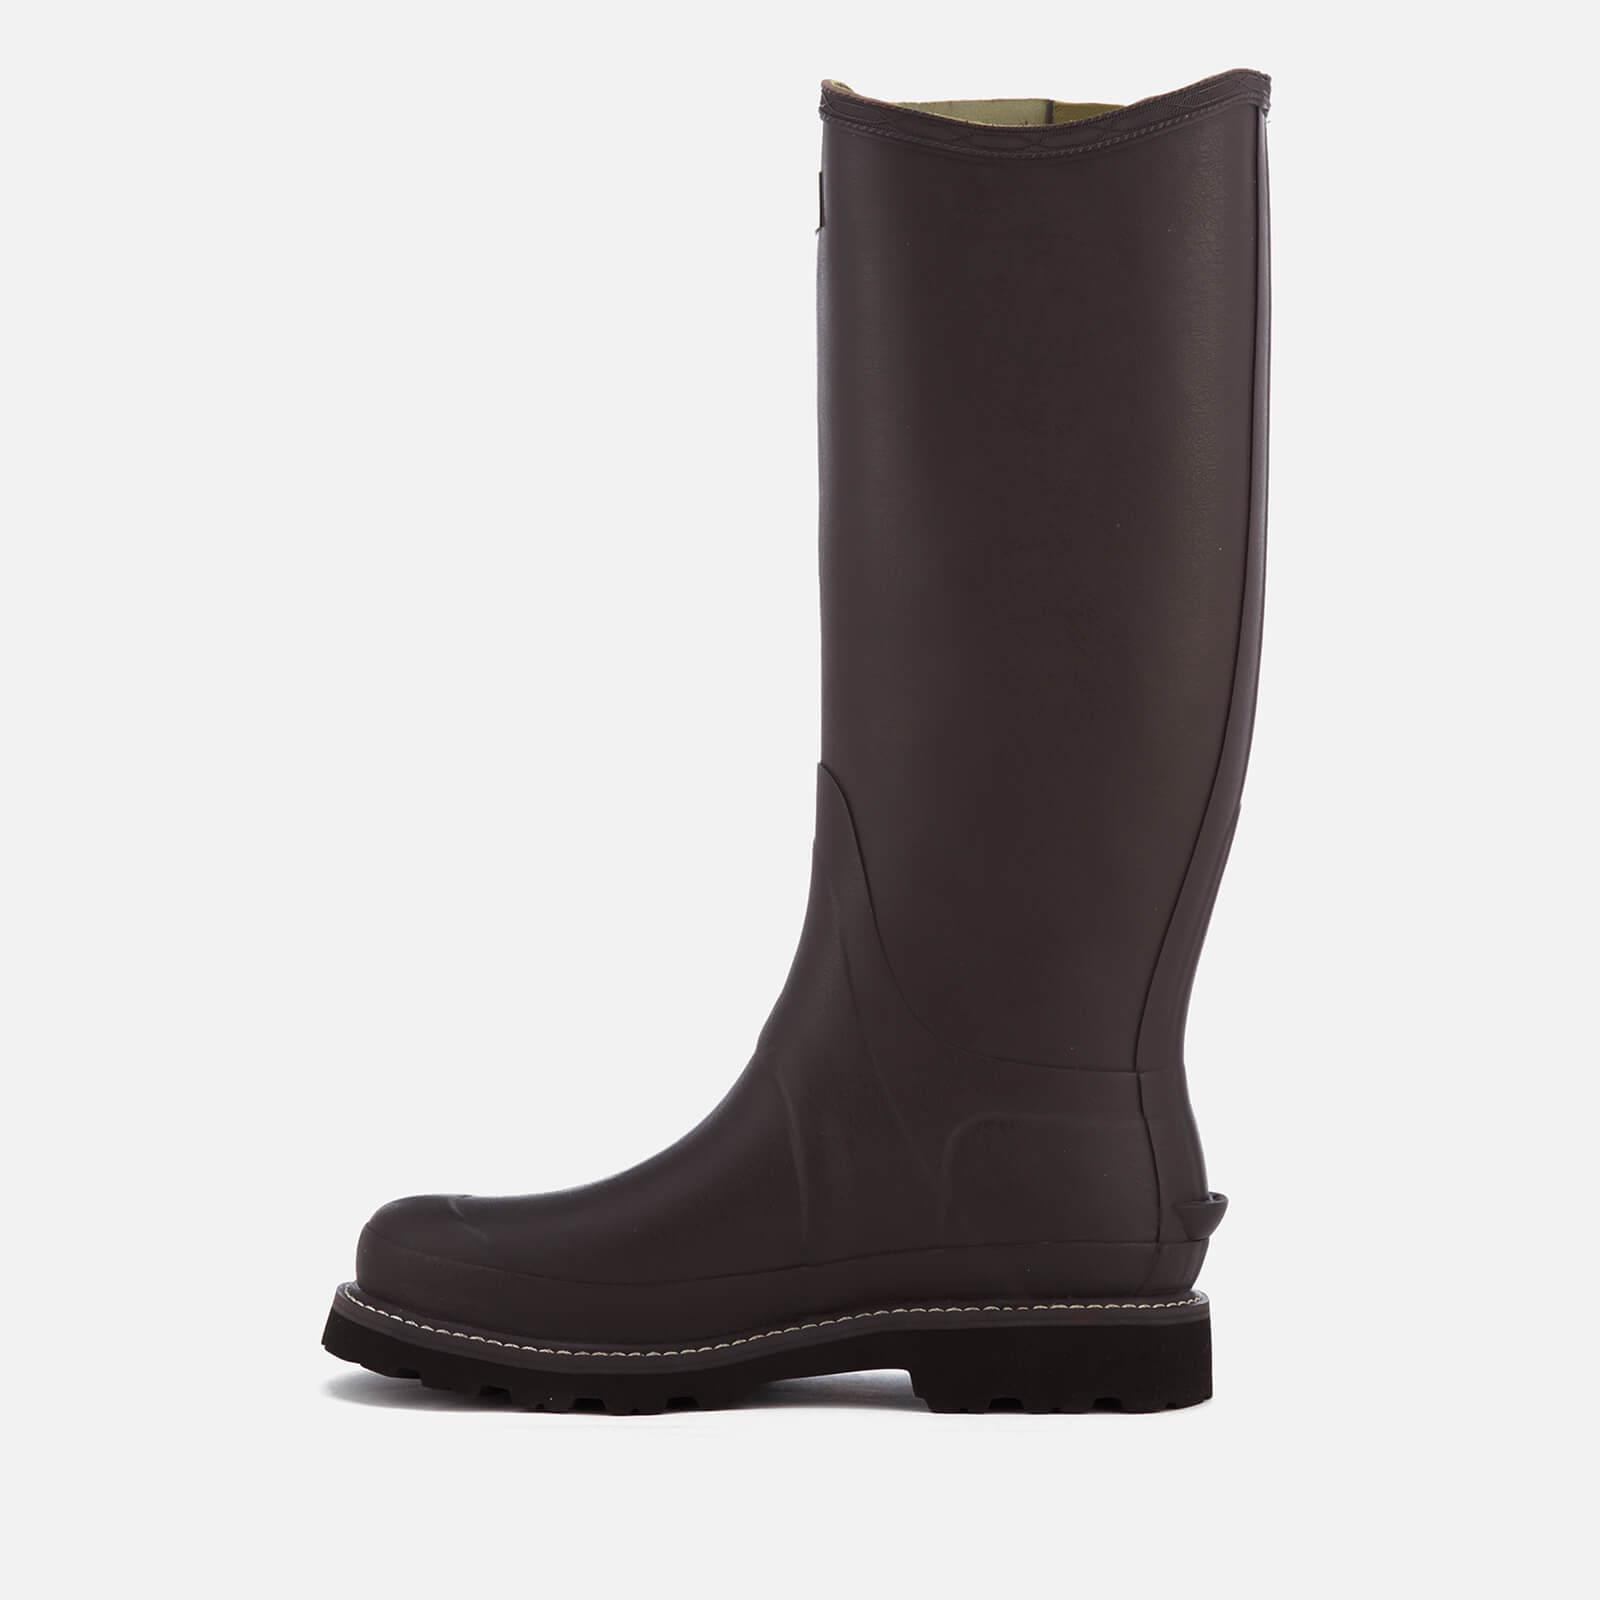 HUNTER Rubber Balmoral Side Zip Wellington Boots in Brown - Lyst